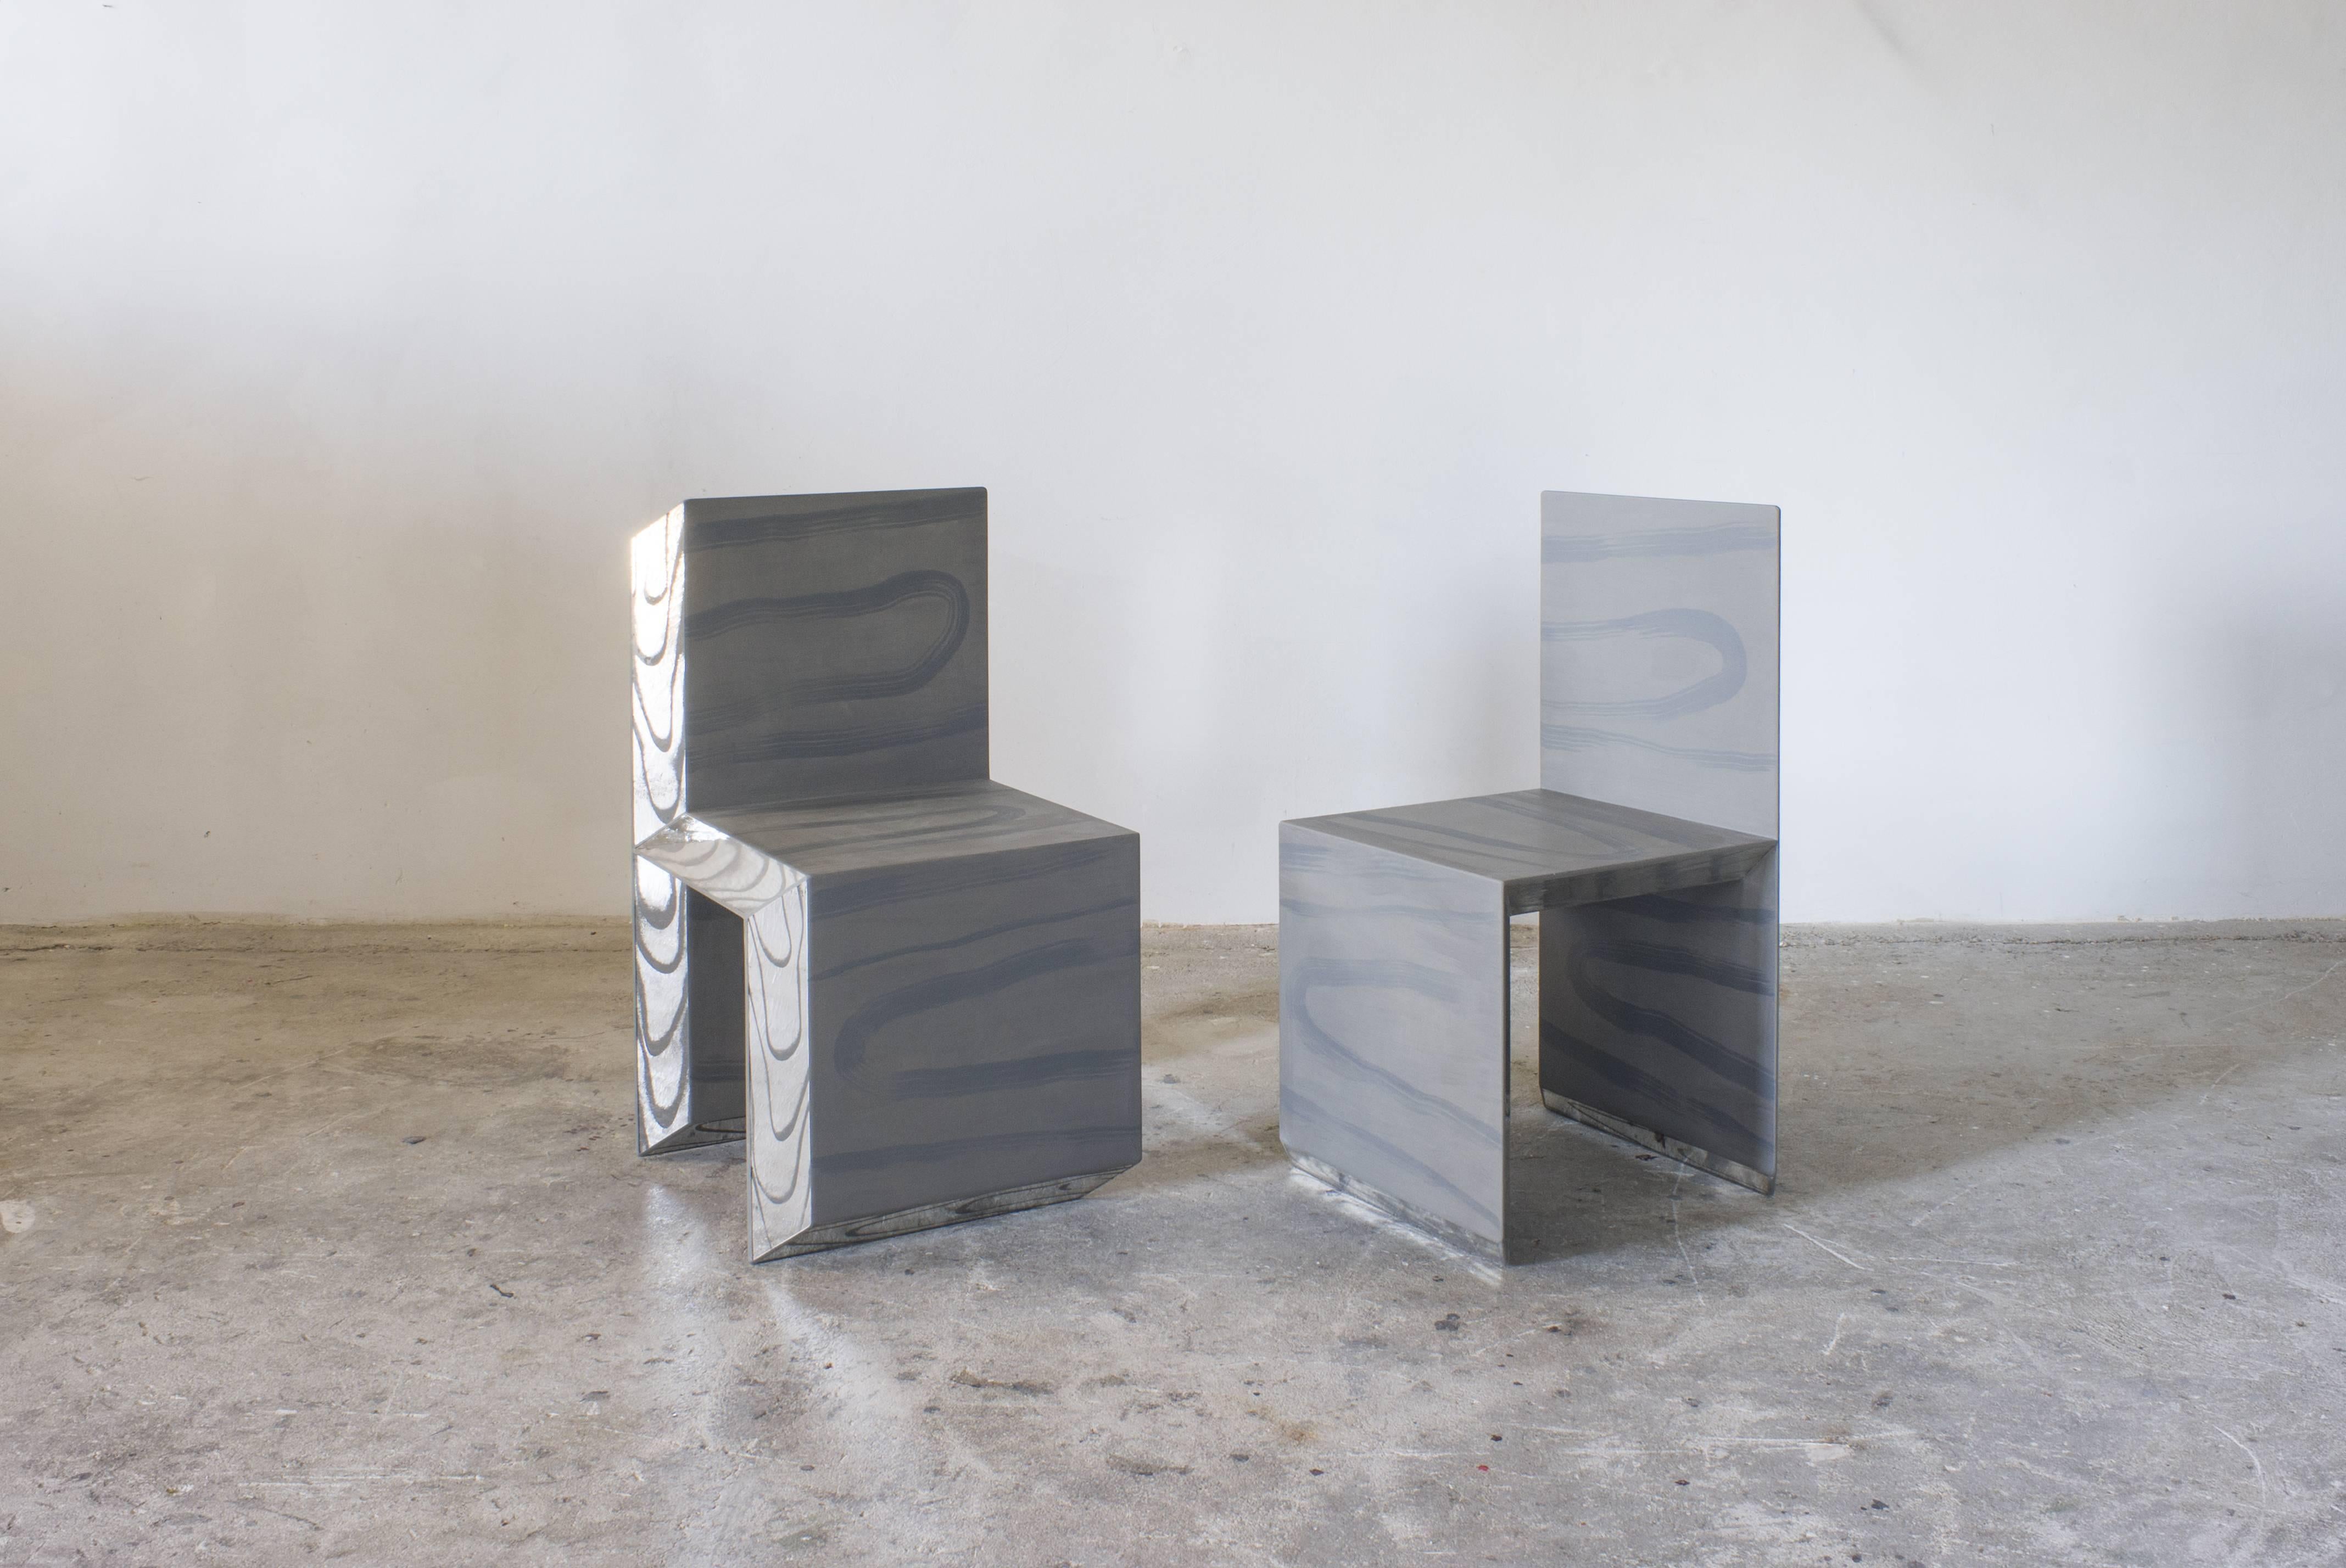 Chairs made of colored mirror and painted panel. 

Available in three colours: 

Silver patinated mirror, painted panel in shades of grey.
Amber mirror, painted panel in shades of grey. 
Garnet pink mirror, painted panel in shades of grey. 



